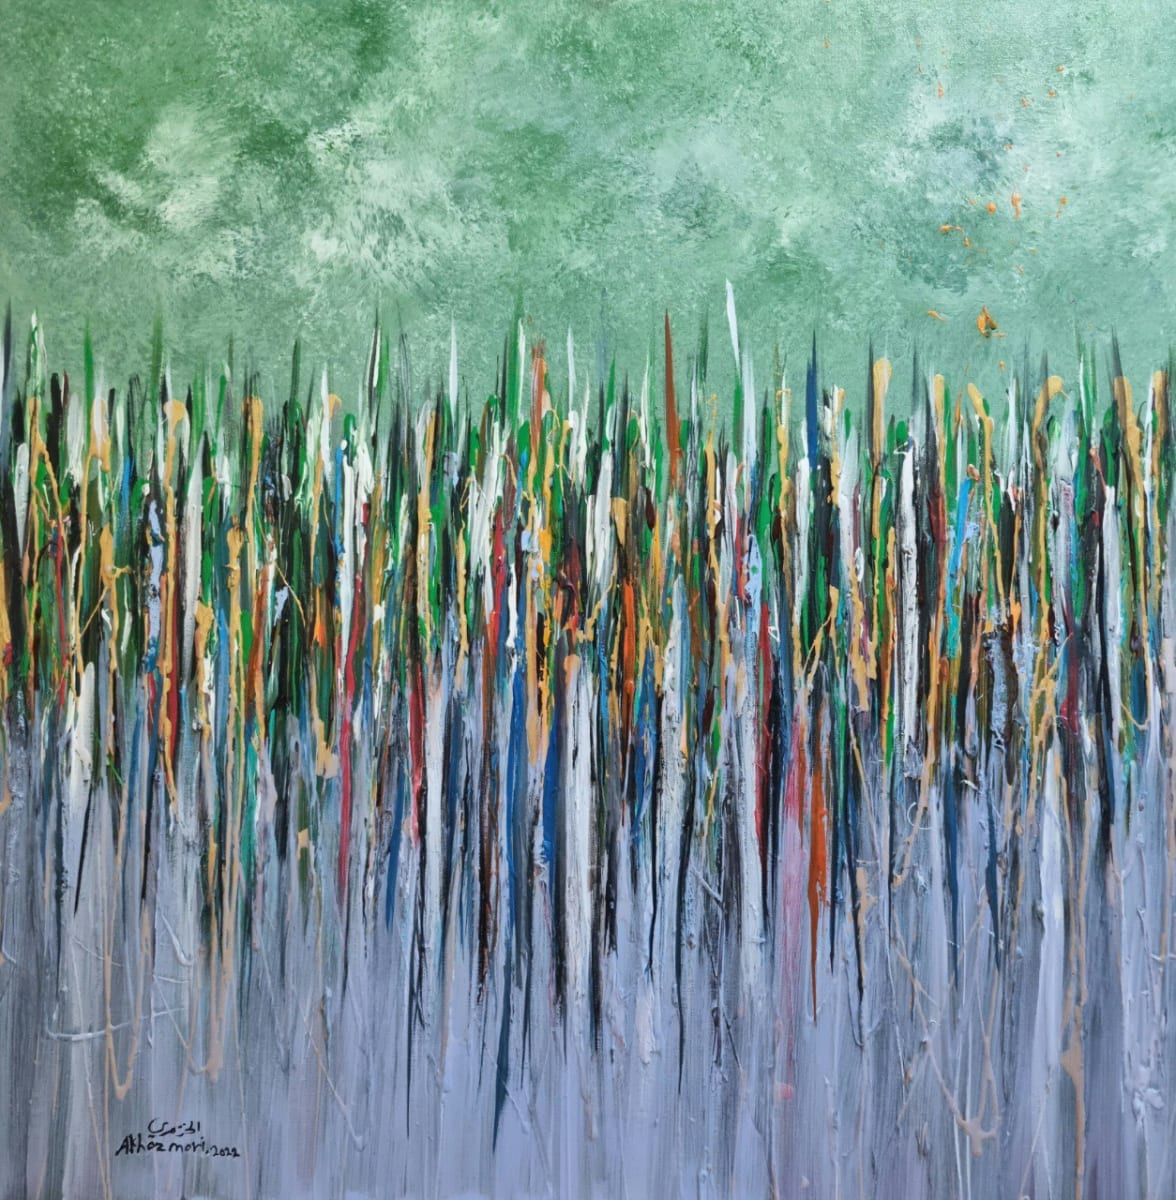 Verdant Resurgence by Ahmed Al Khazmari  Image: "Verdant Resurgence" is an abstract painting that captures the vitality of a lush landscape. The upward strokes of vibrant colors suggest a verdant field or forest canopy, while the lighter hues at the bottom might represent a misty morning. The green hues at the top evoke the freshness of nature and the cycle of renewal.

